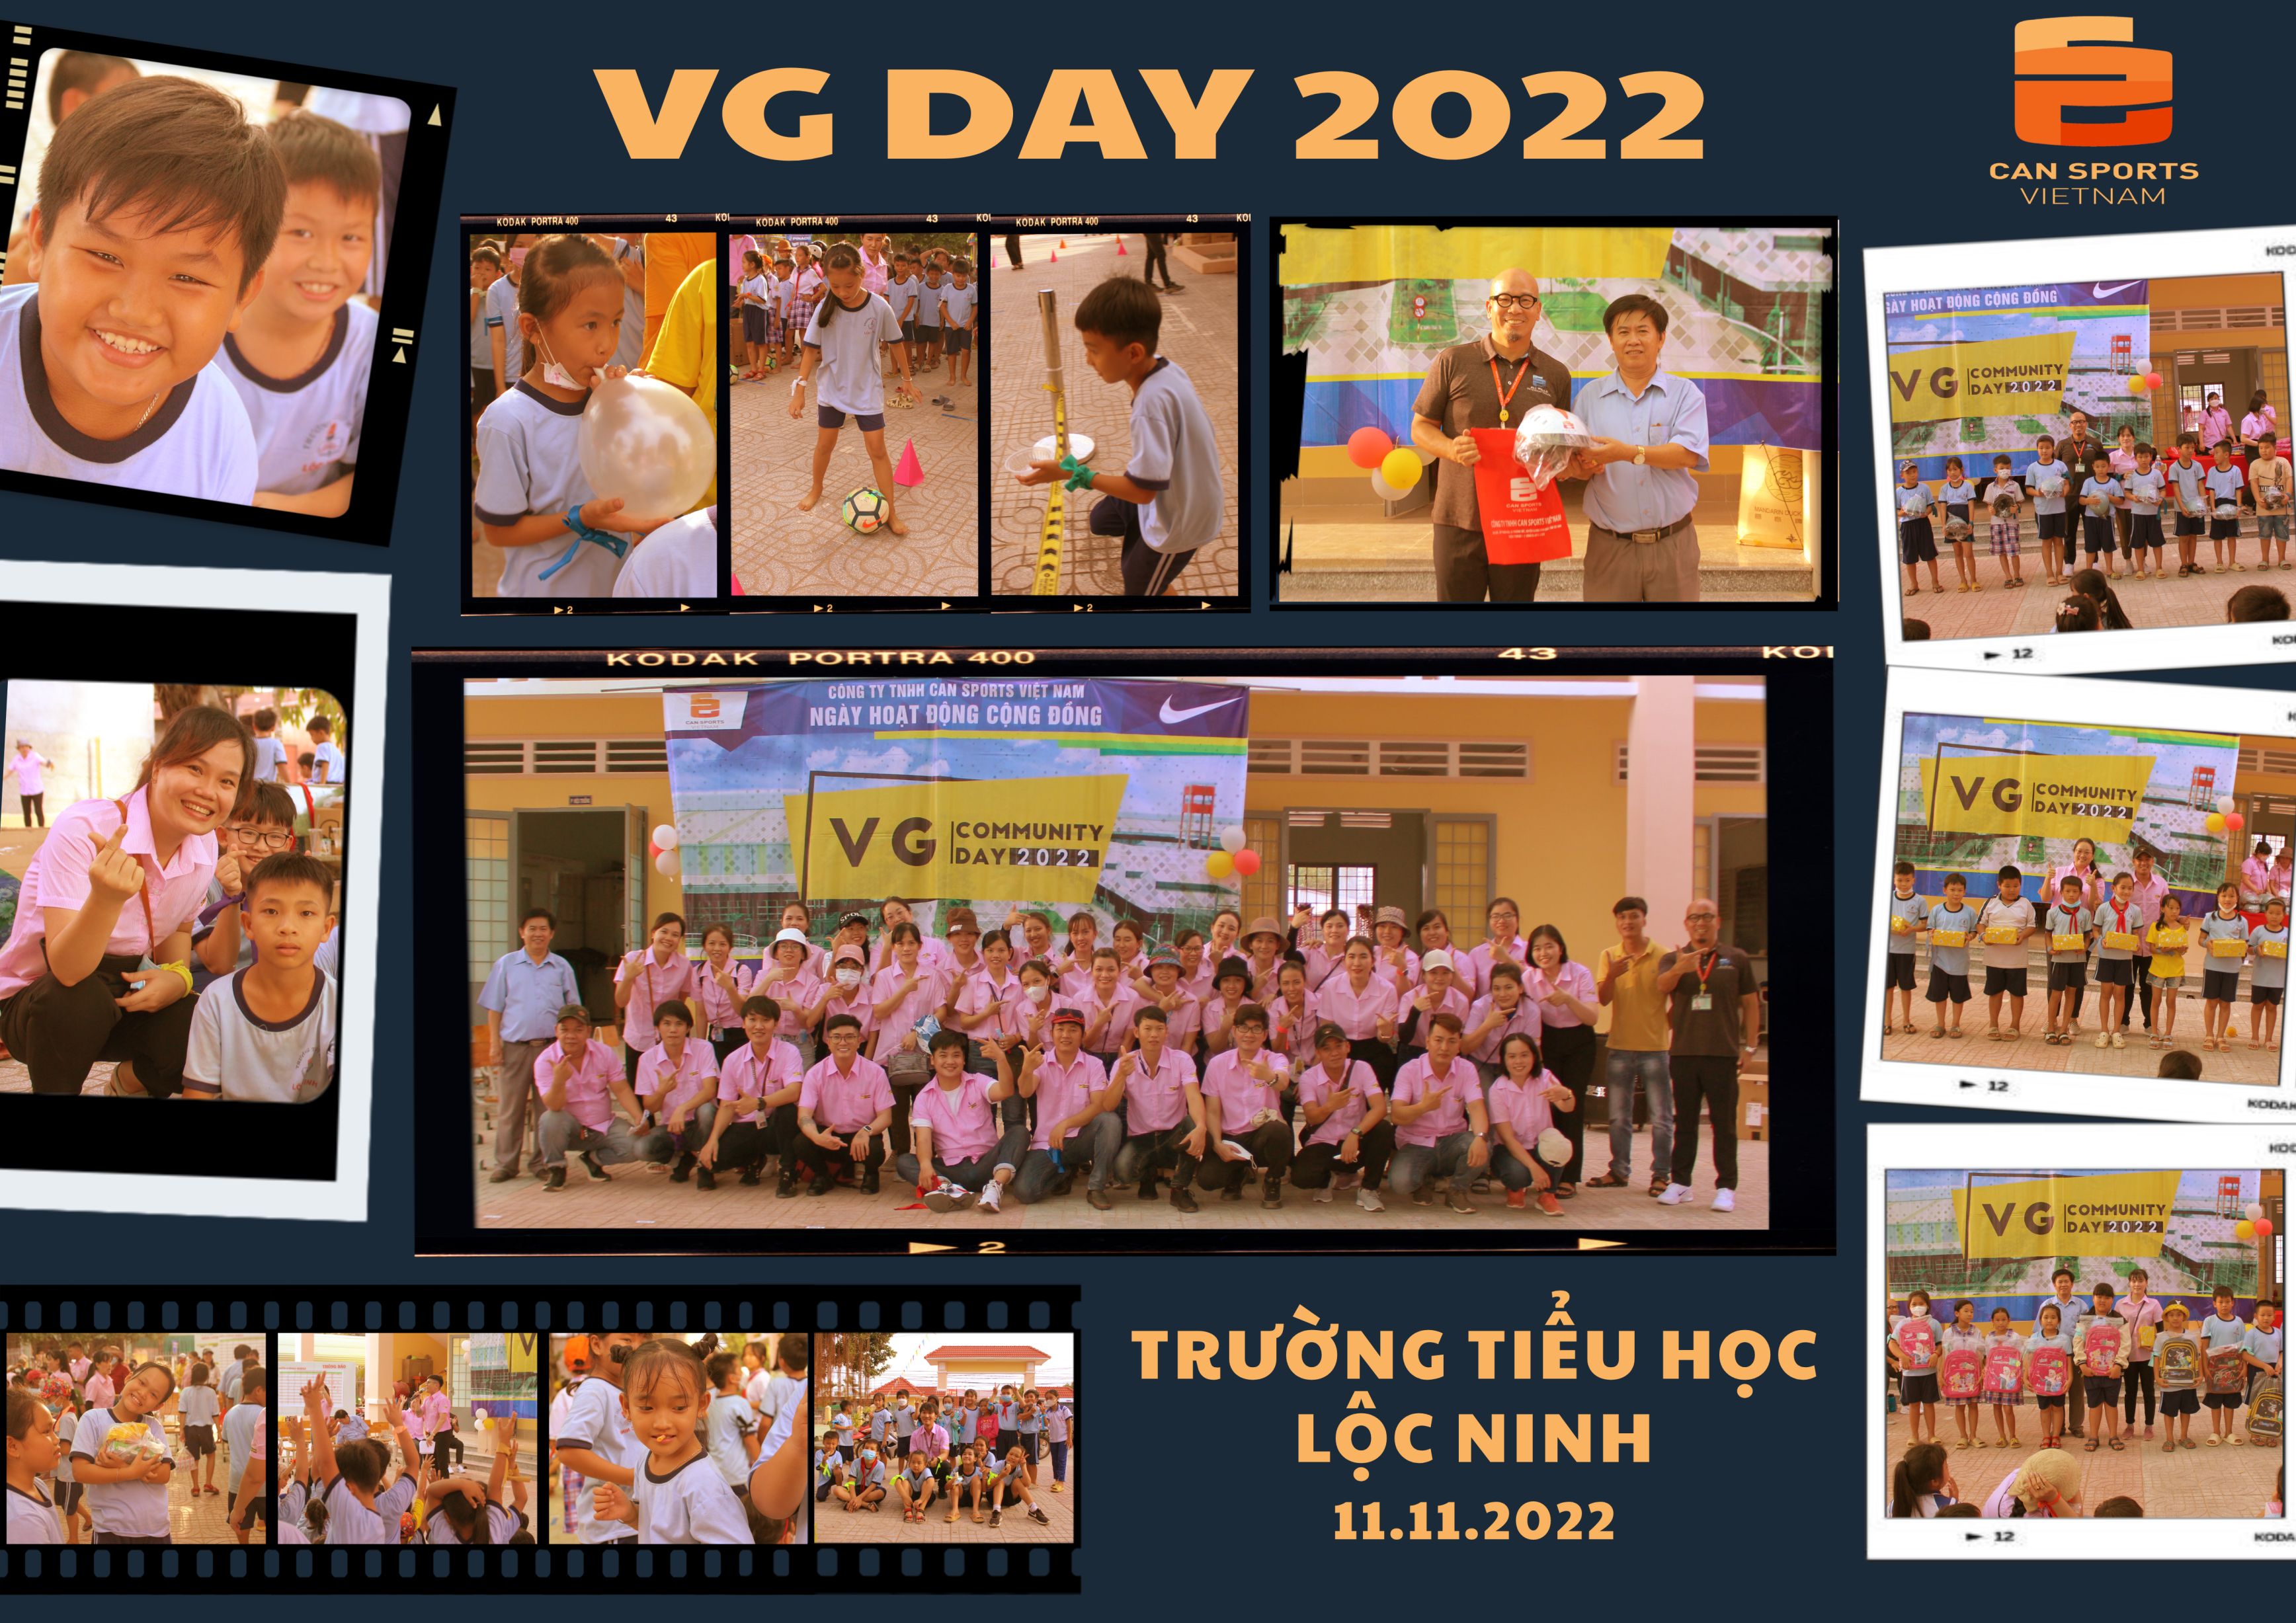 VG DAY 2022 small size